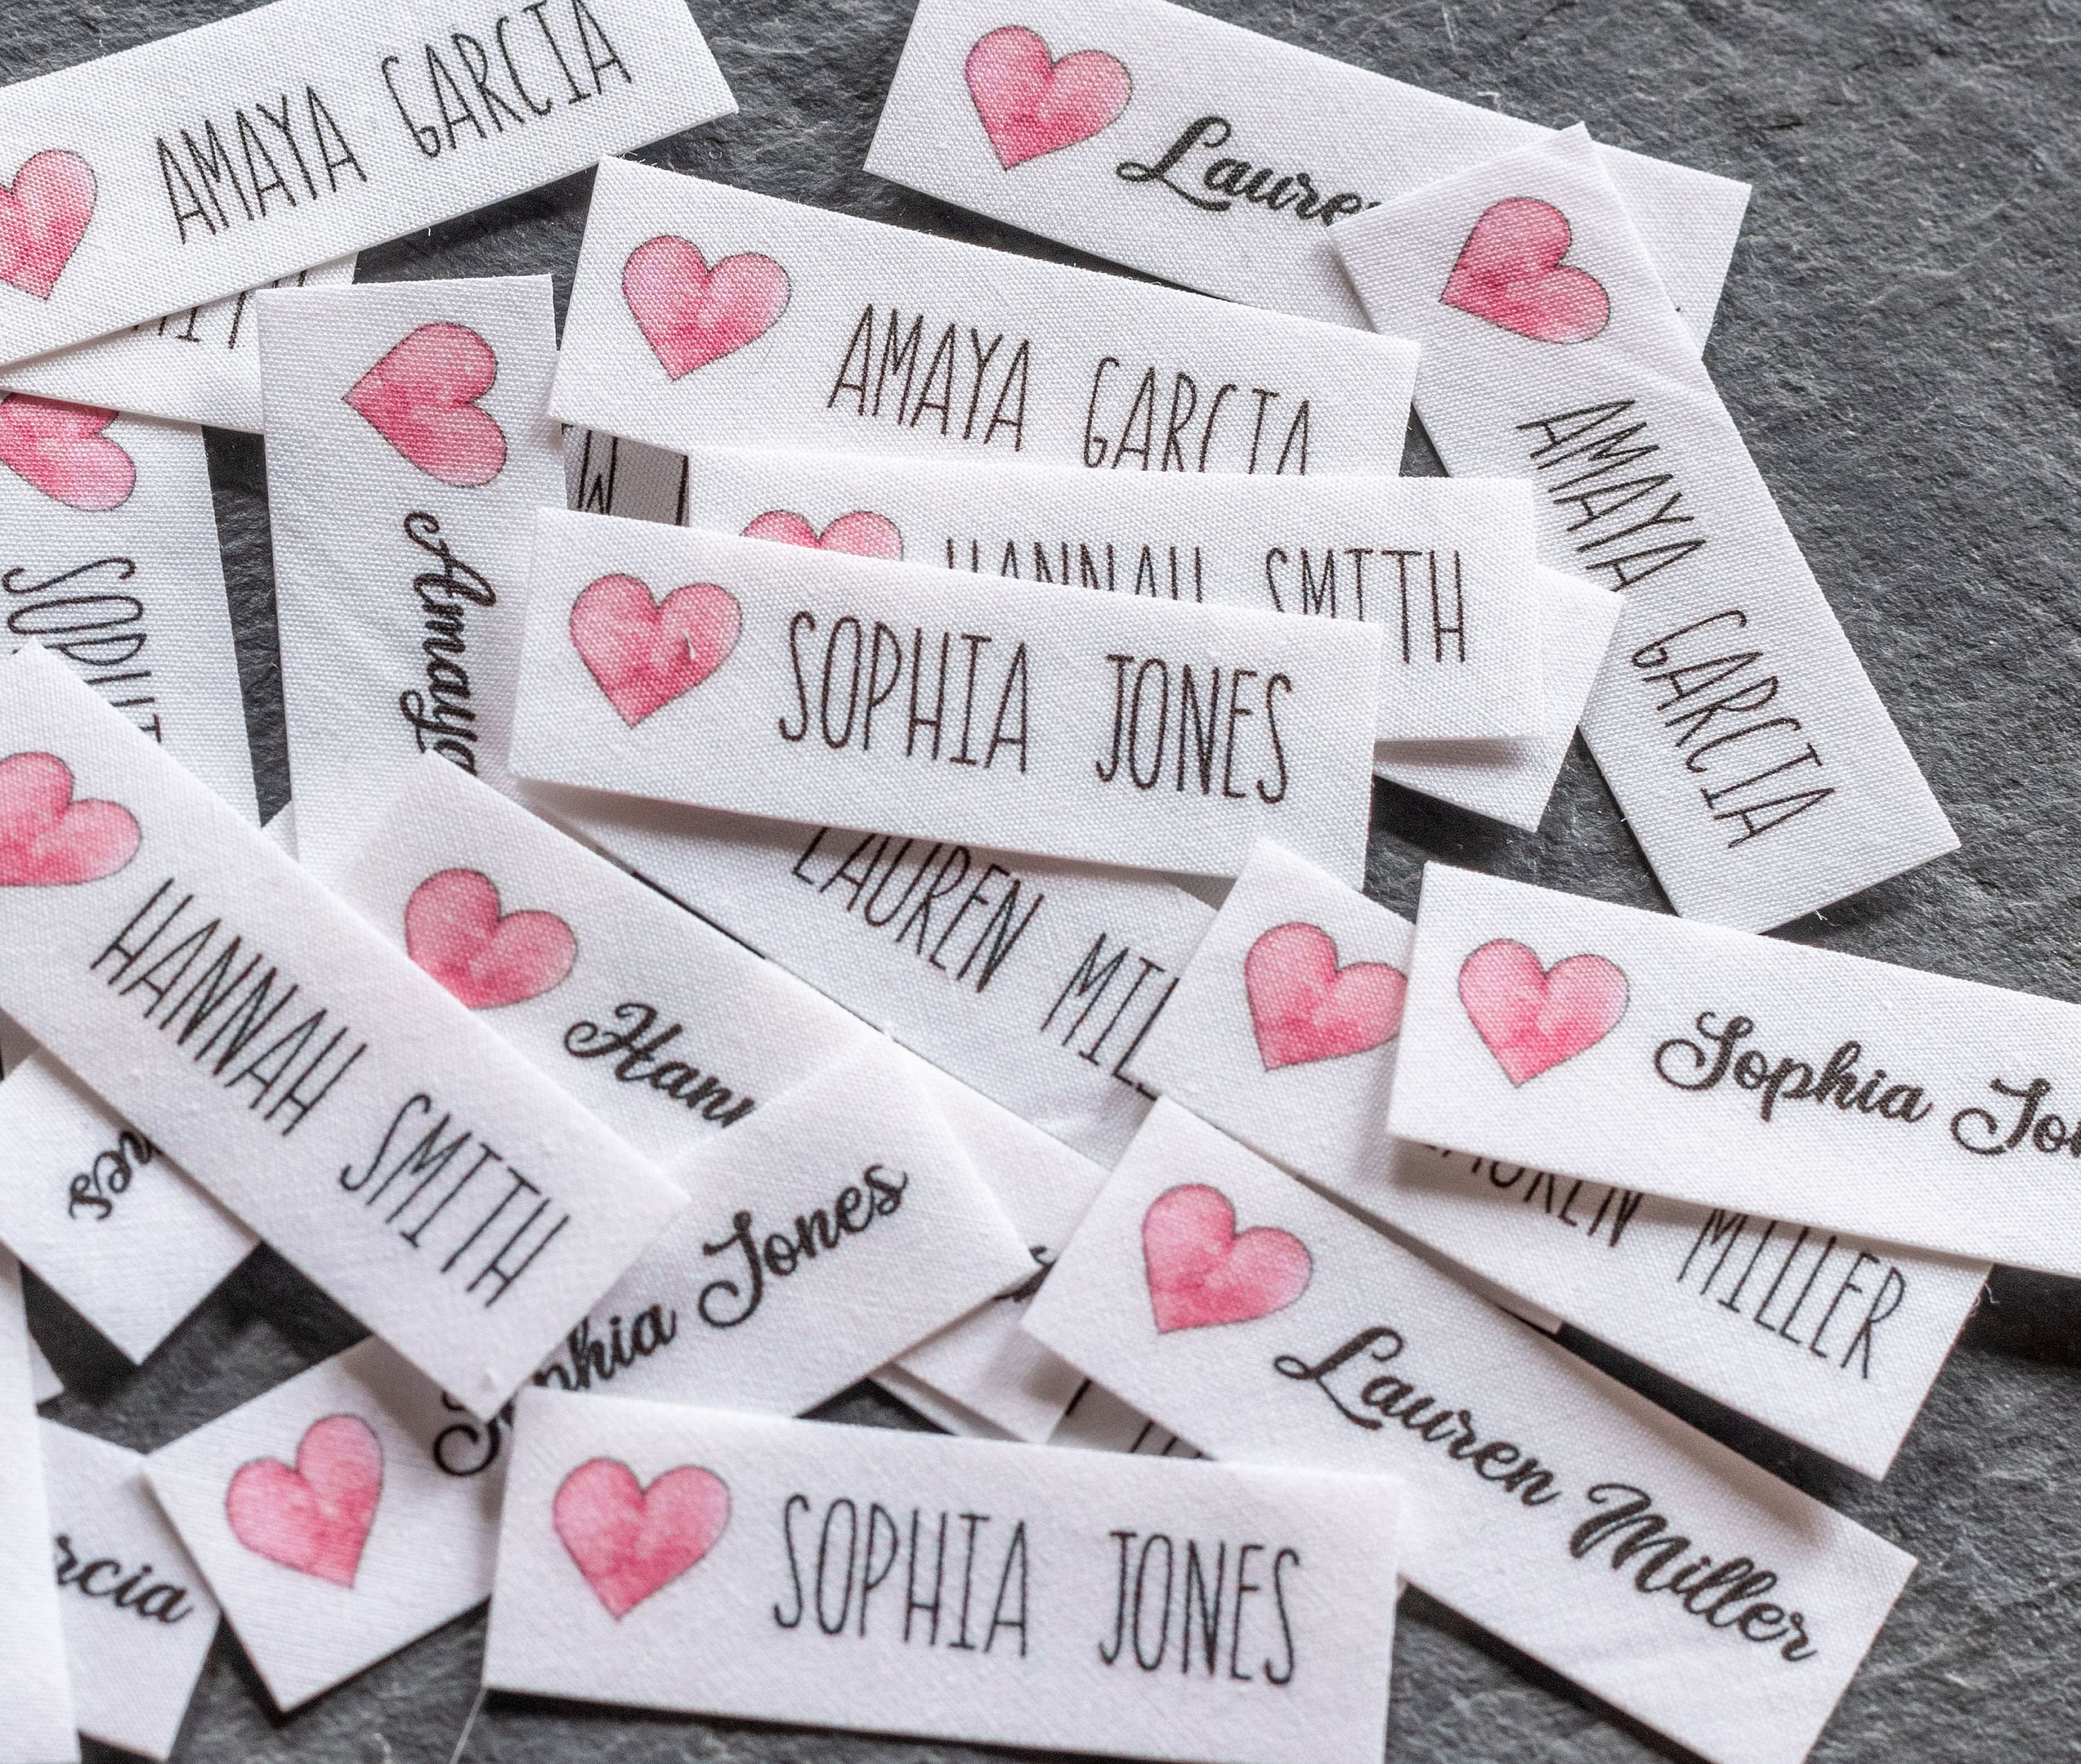 50 Personalized Name Tags for Clothes to Mark Baby and Children's Clothing.  Iron-on Stickers, Resistant to Washing Machine and Dryer. Size 2.3 x 0.4